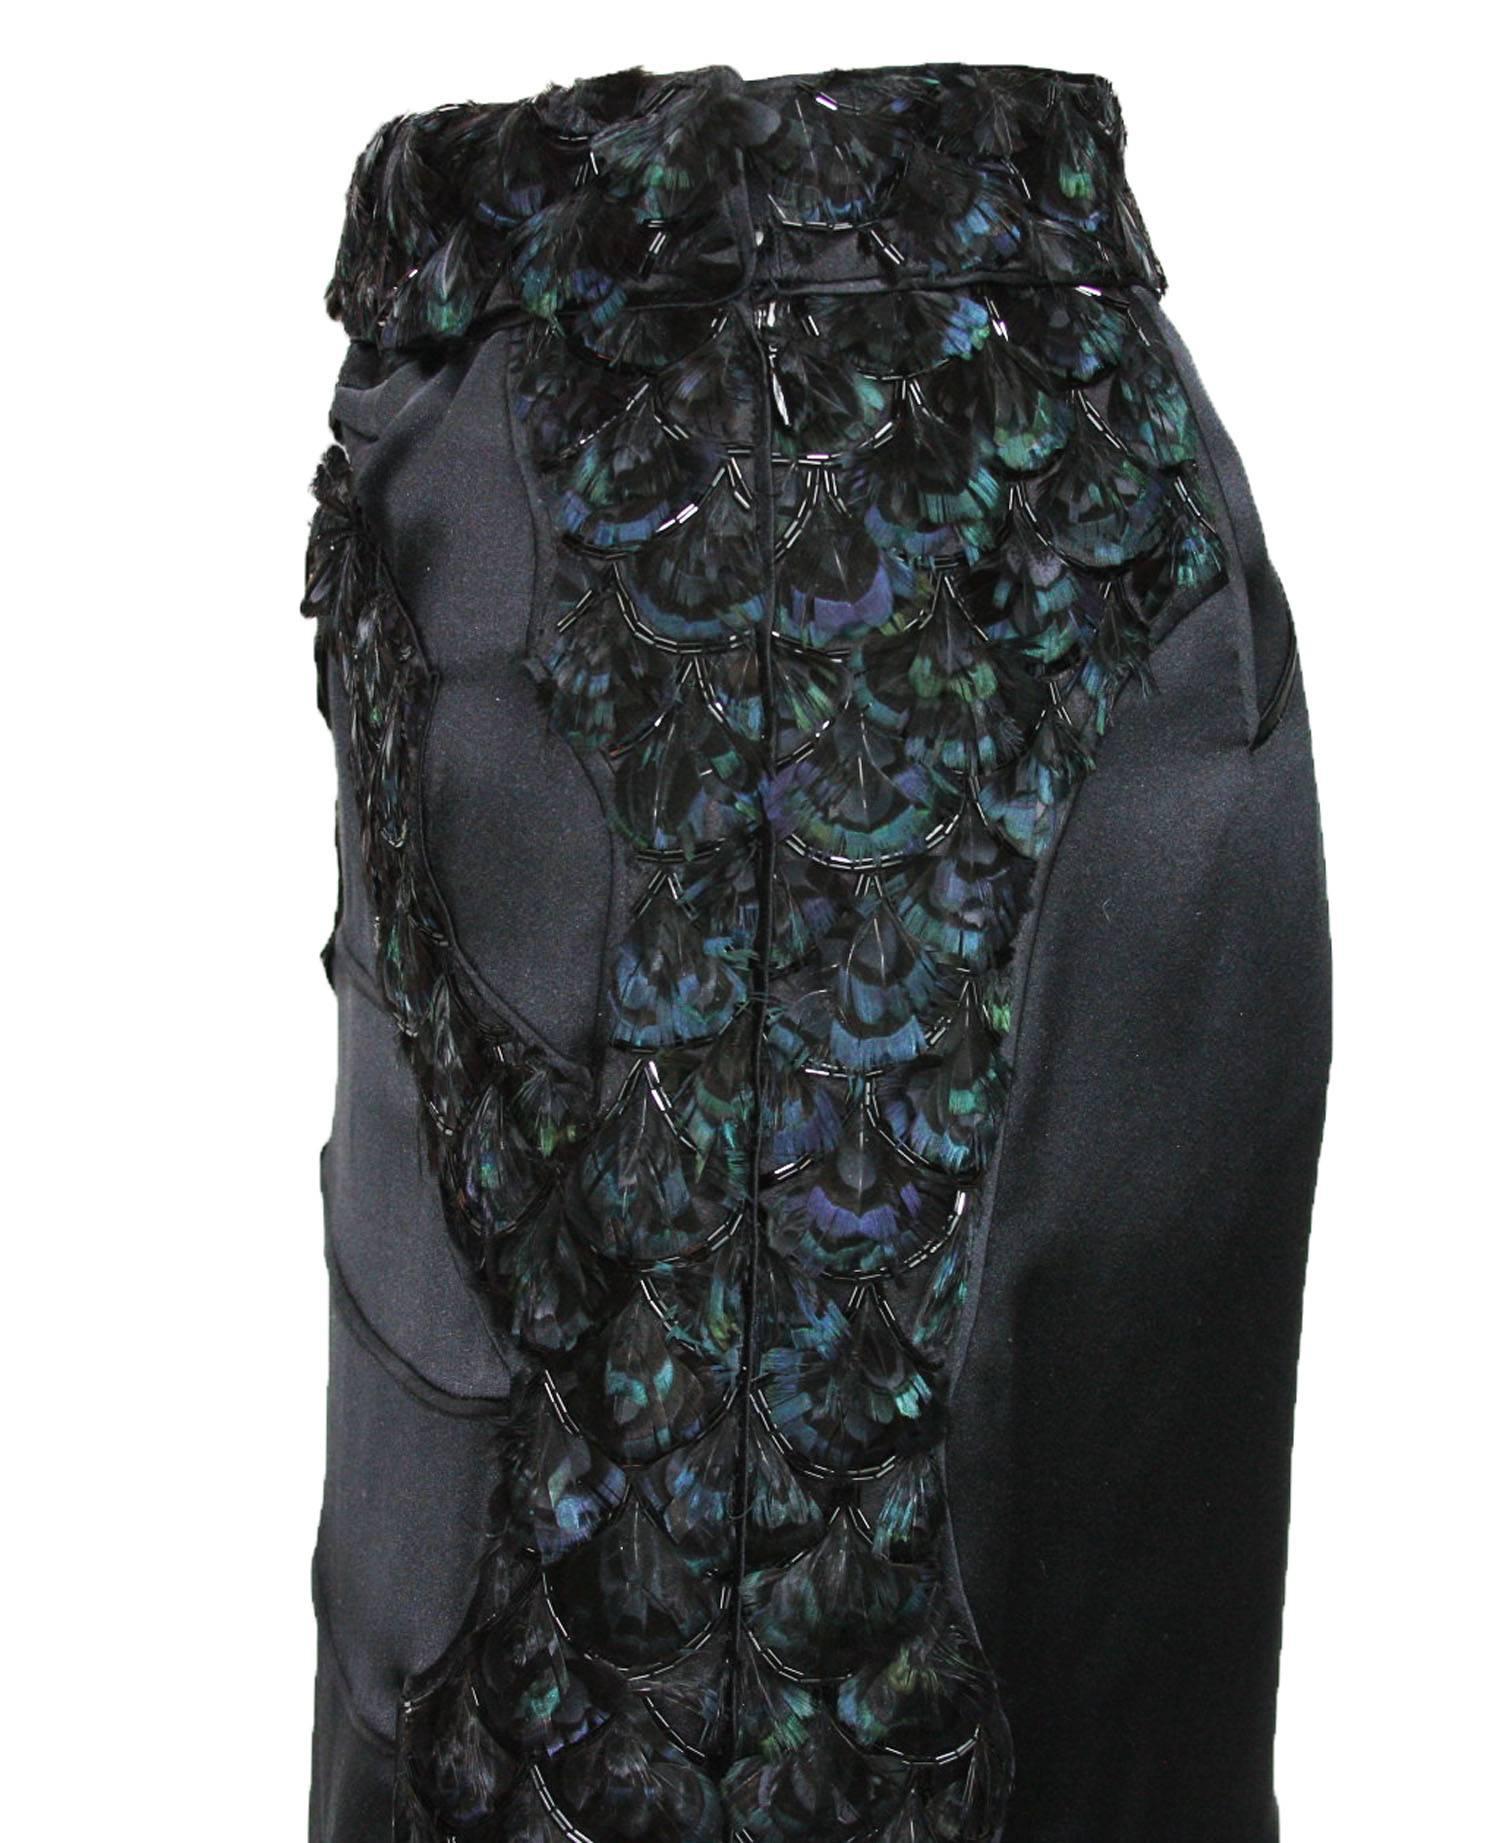 New Tom Ford for Yves Saint Laurent F/W 2004 Beaded Feather Embellished Skirt 38 4